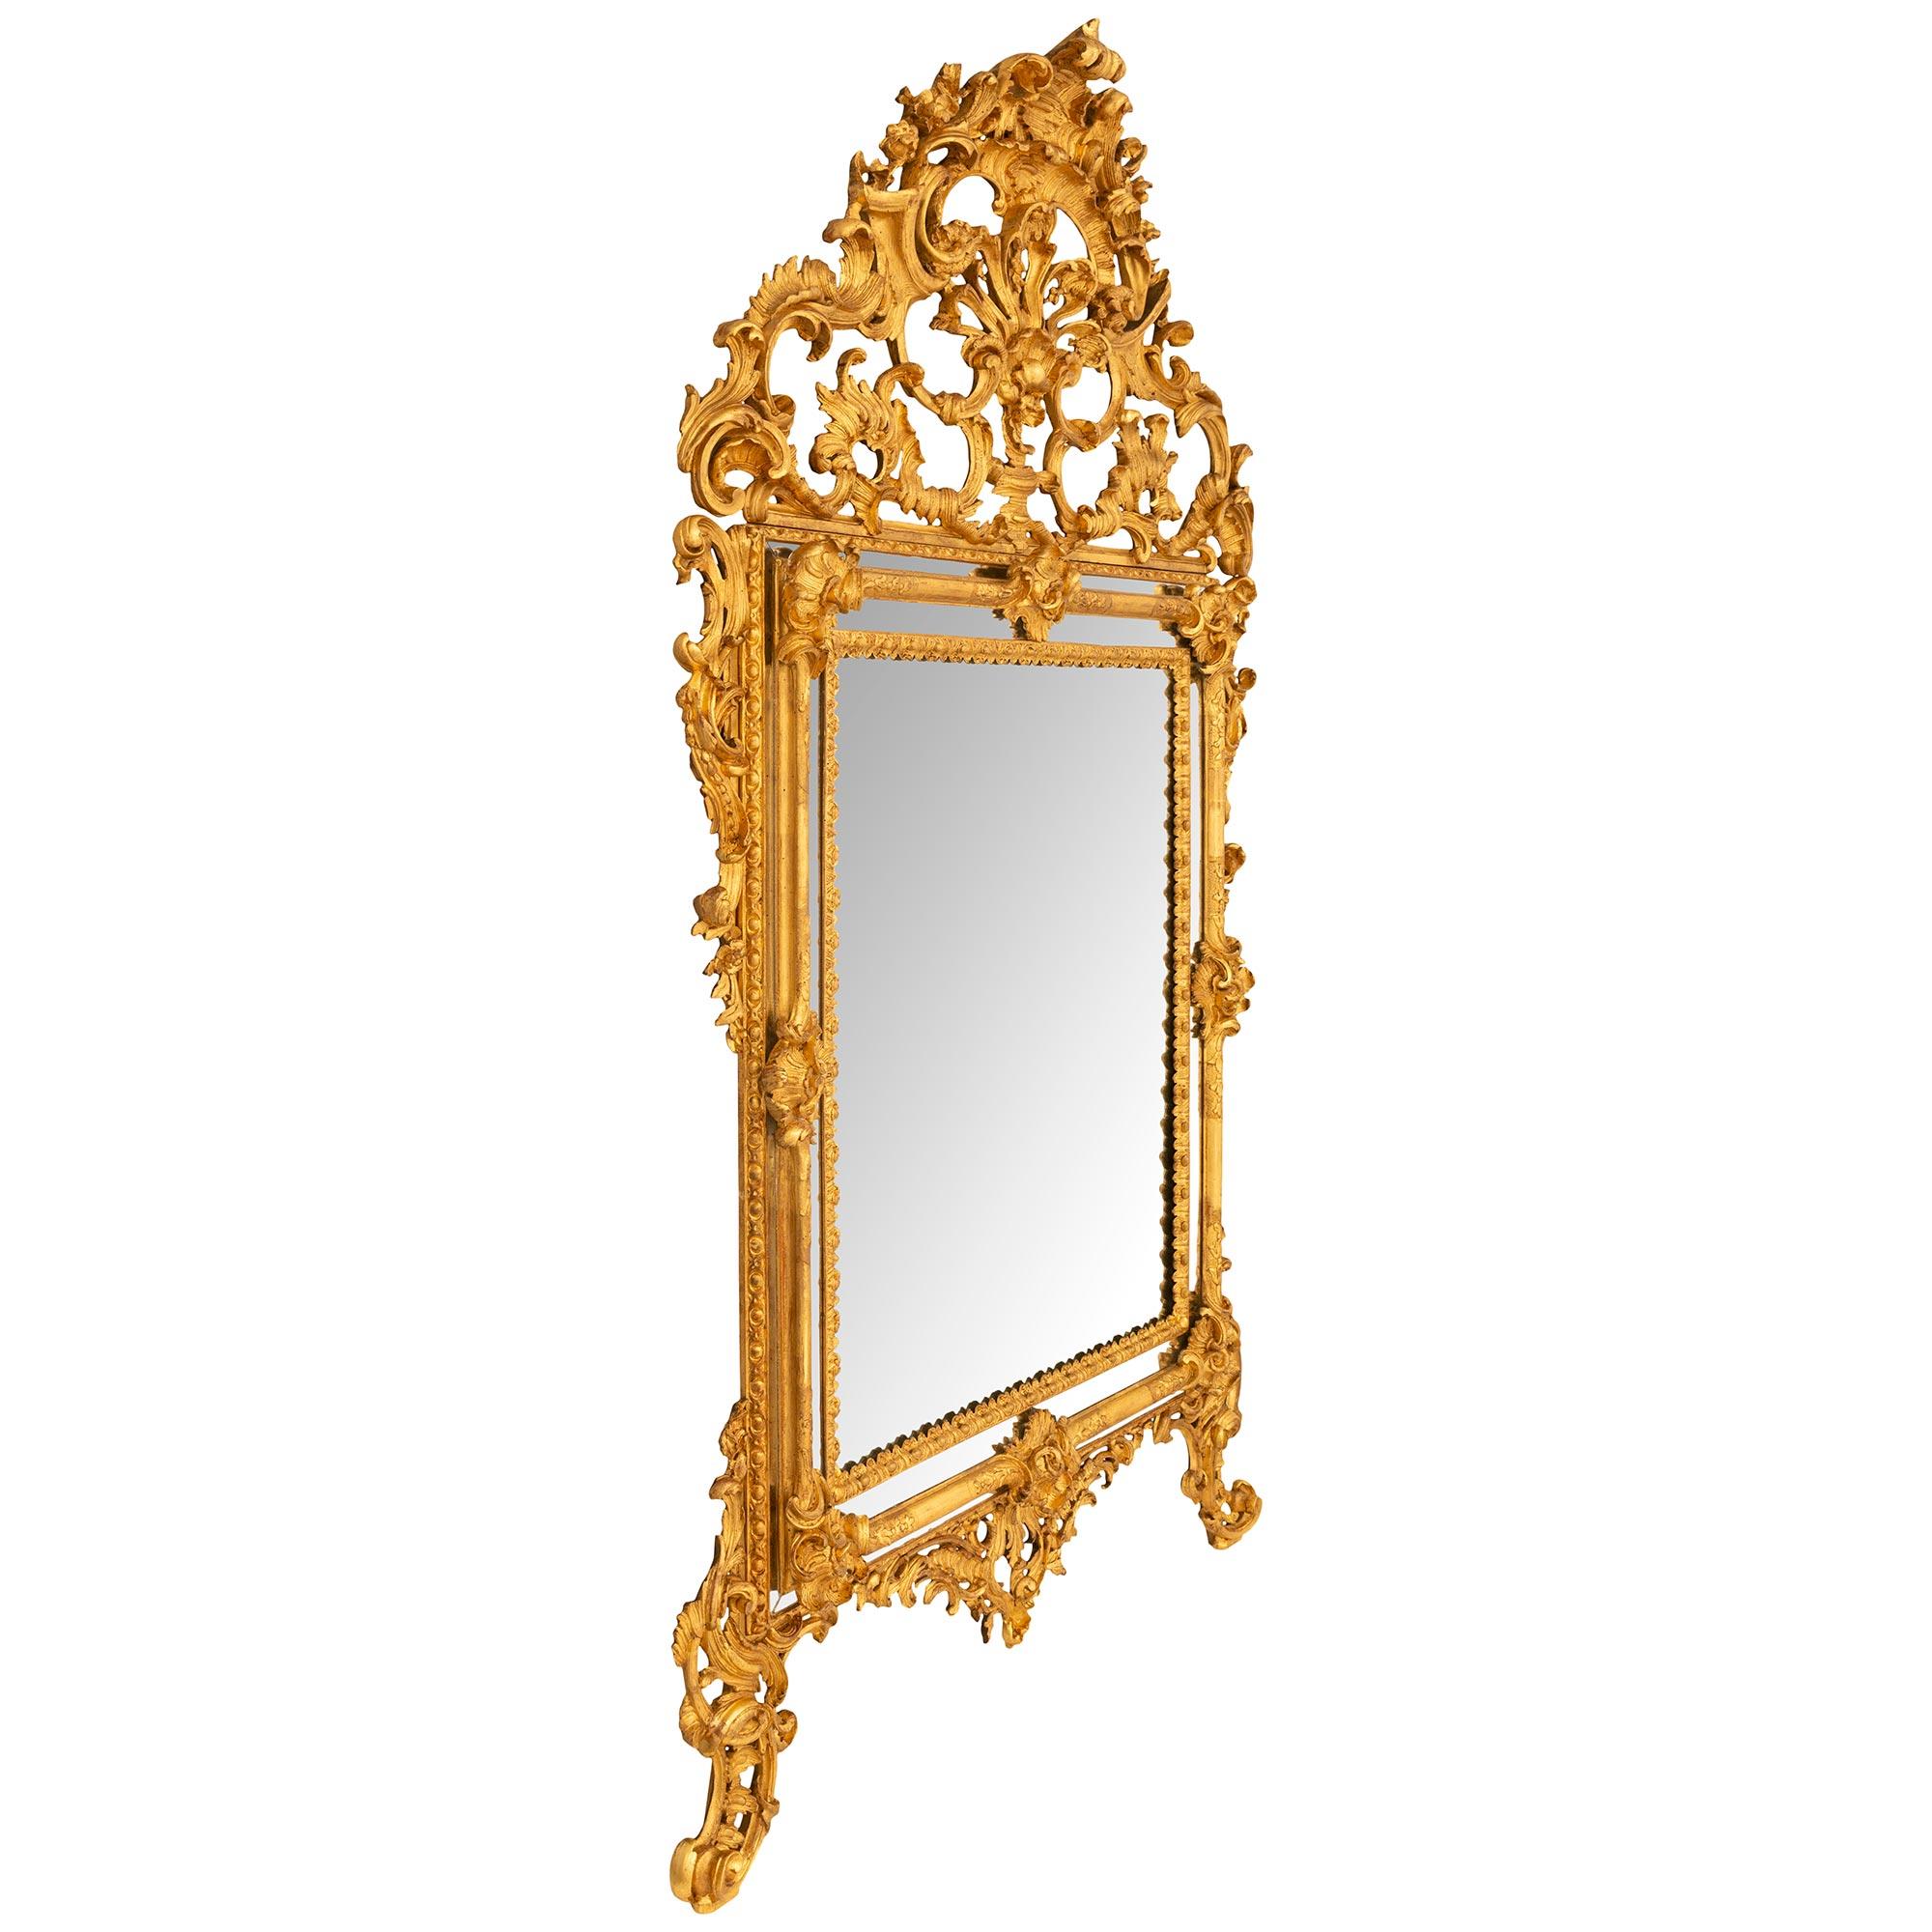 An impressive Italian mid 19th century Baroque st. triple framed giltwood mirror. The large scale mirror is raised by pierced S scrolled supports flanking the pierced central foliate reserve. The triple framed mirror is decorated by eight carved